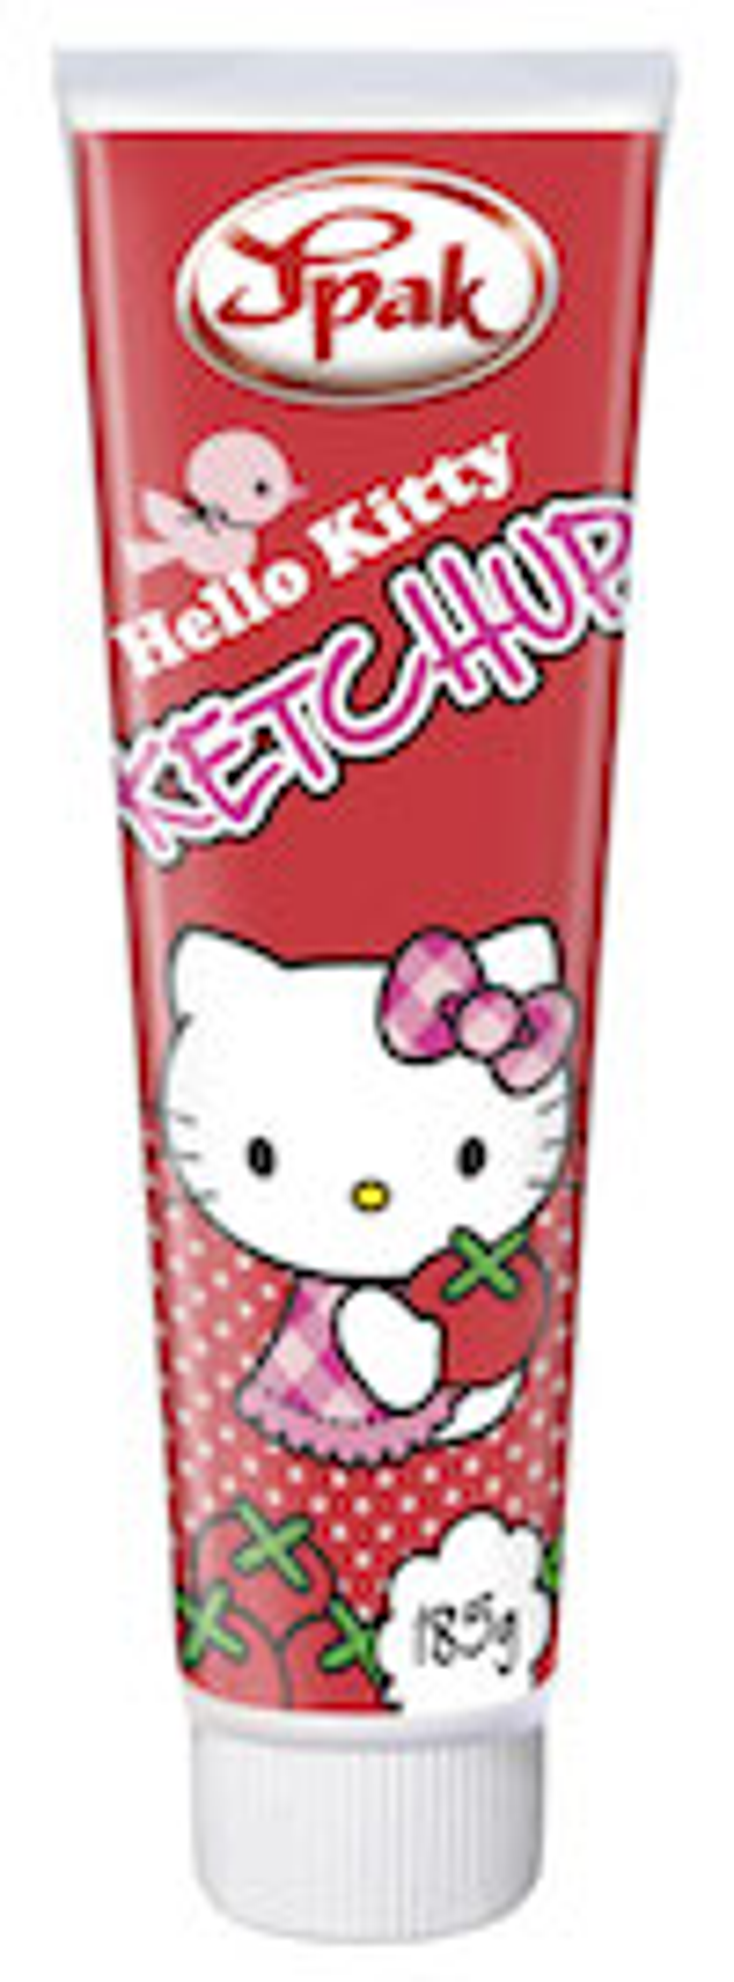 Team! Grows Hello Kitty in Germany